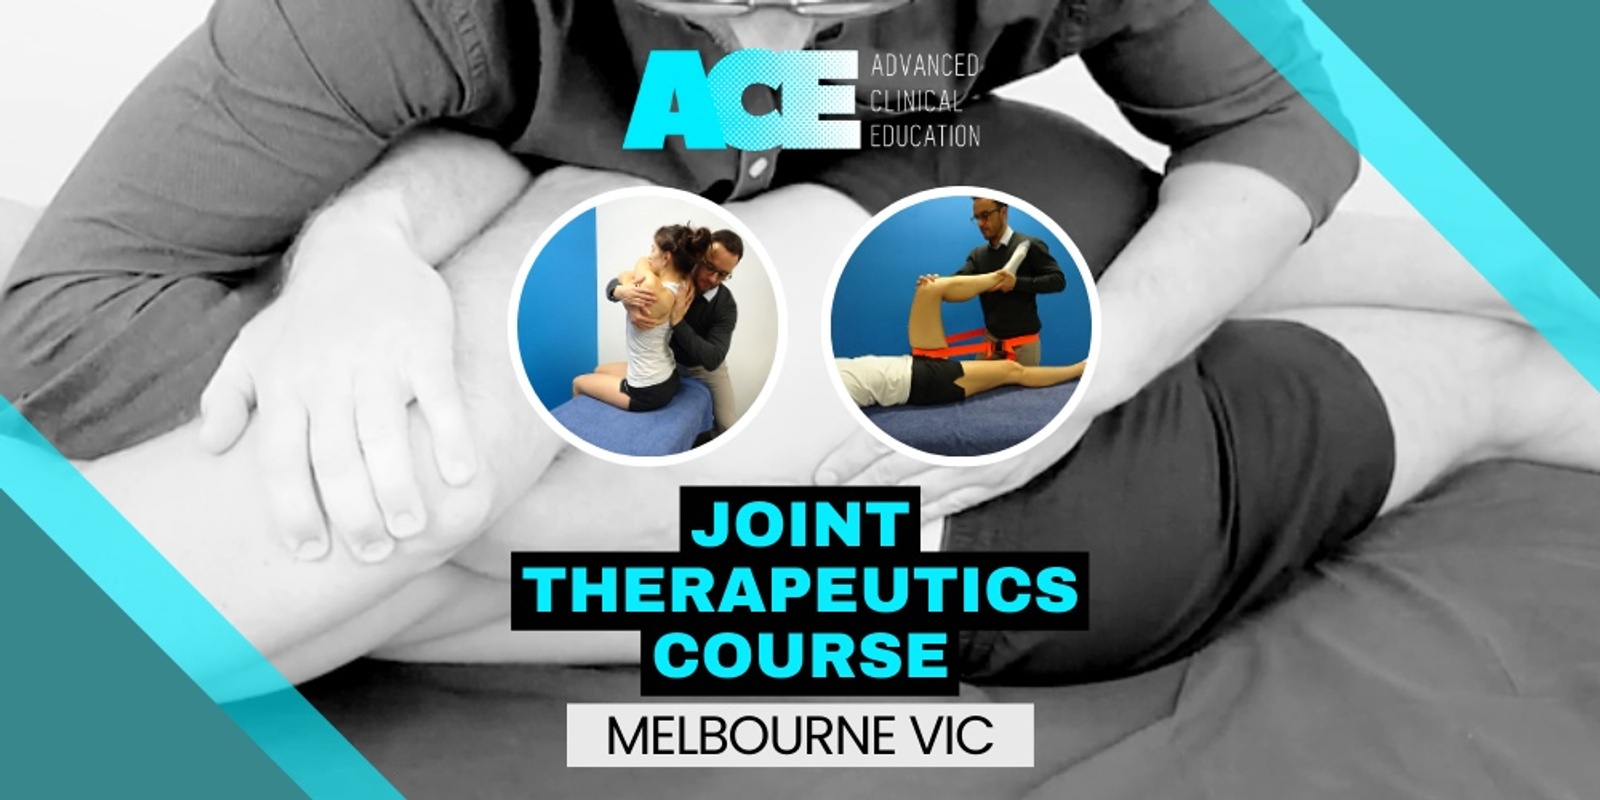 Dry Needling Course Melbourne Vic Humanitix